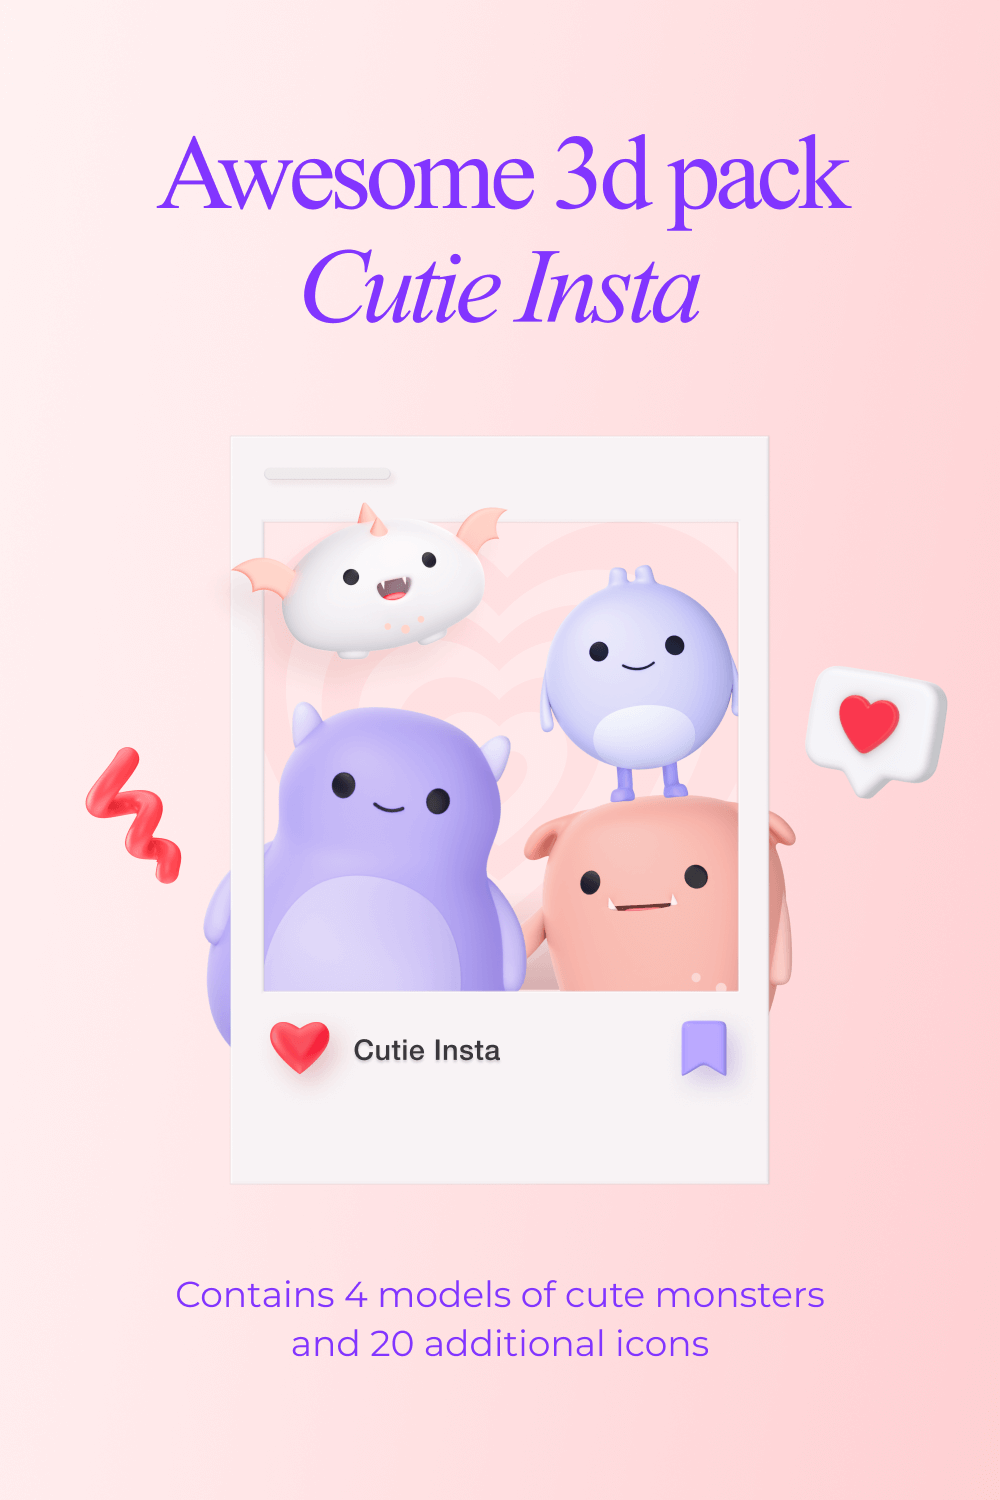 3d Cute Monsters Icons Insta Pack Pinterest Image.